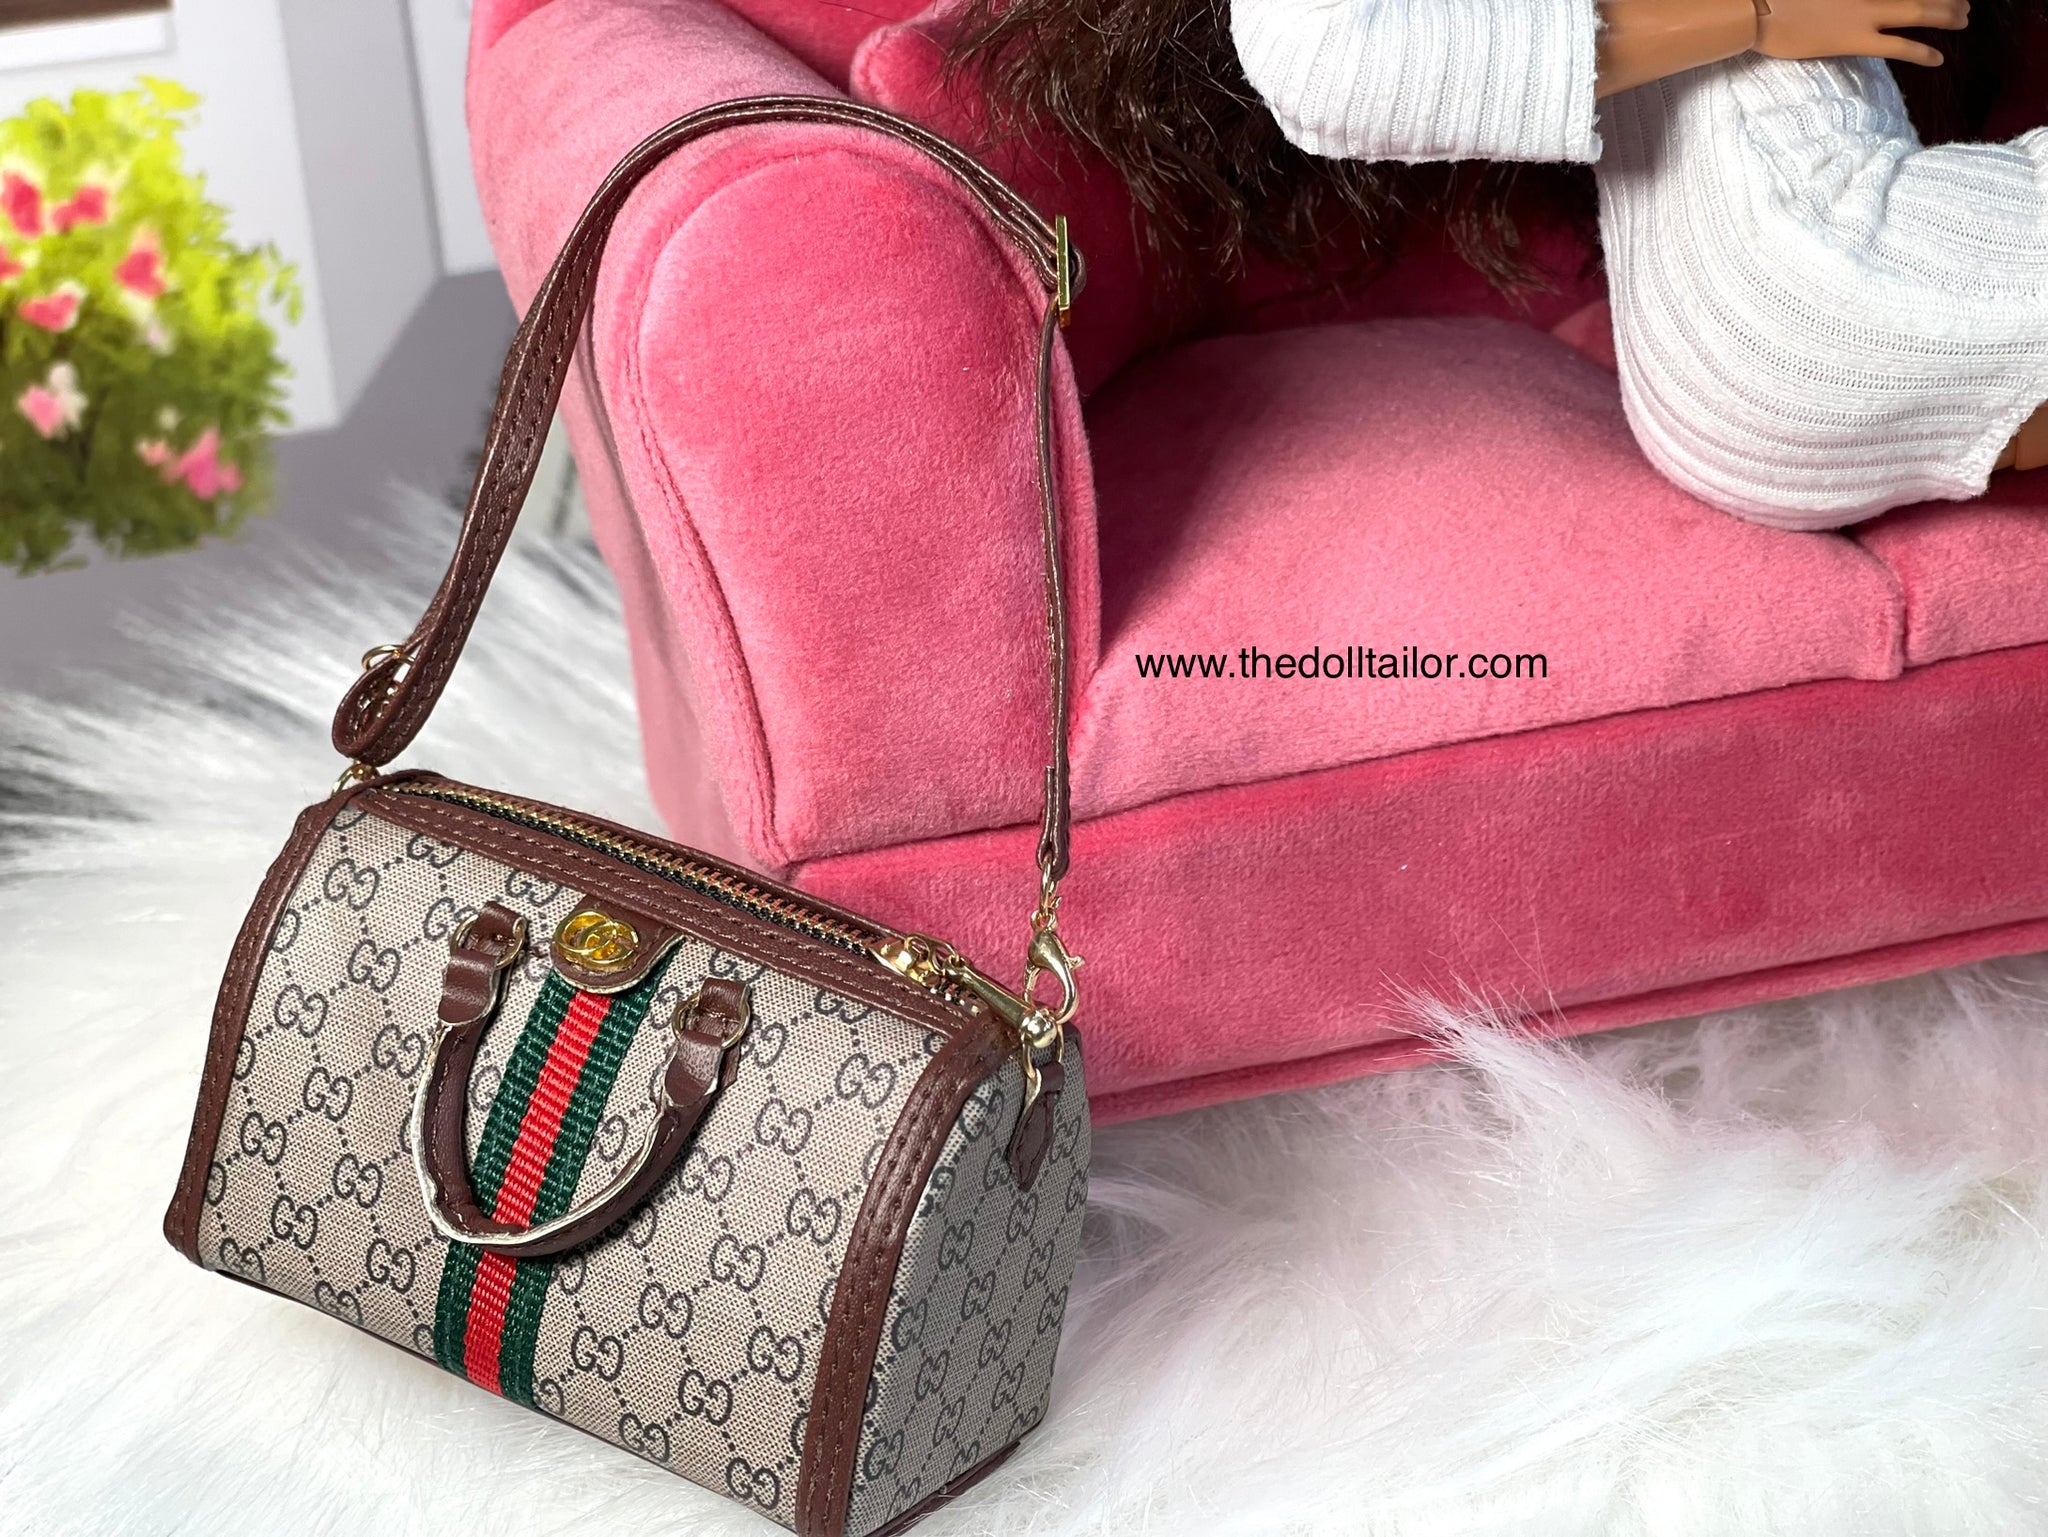 Luxury purse for 1/6 scale dolls – The Doll Tailor